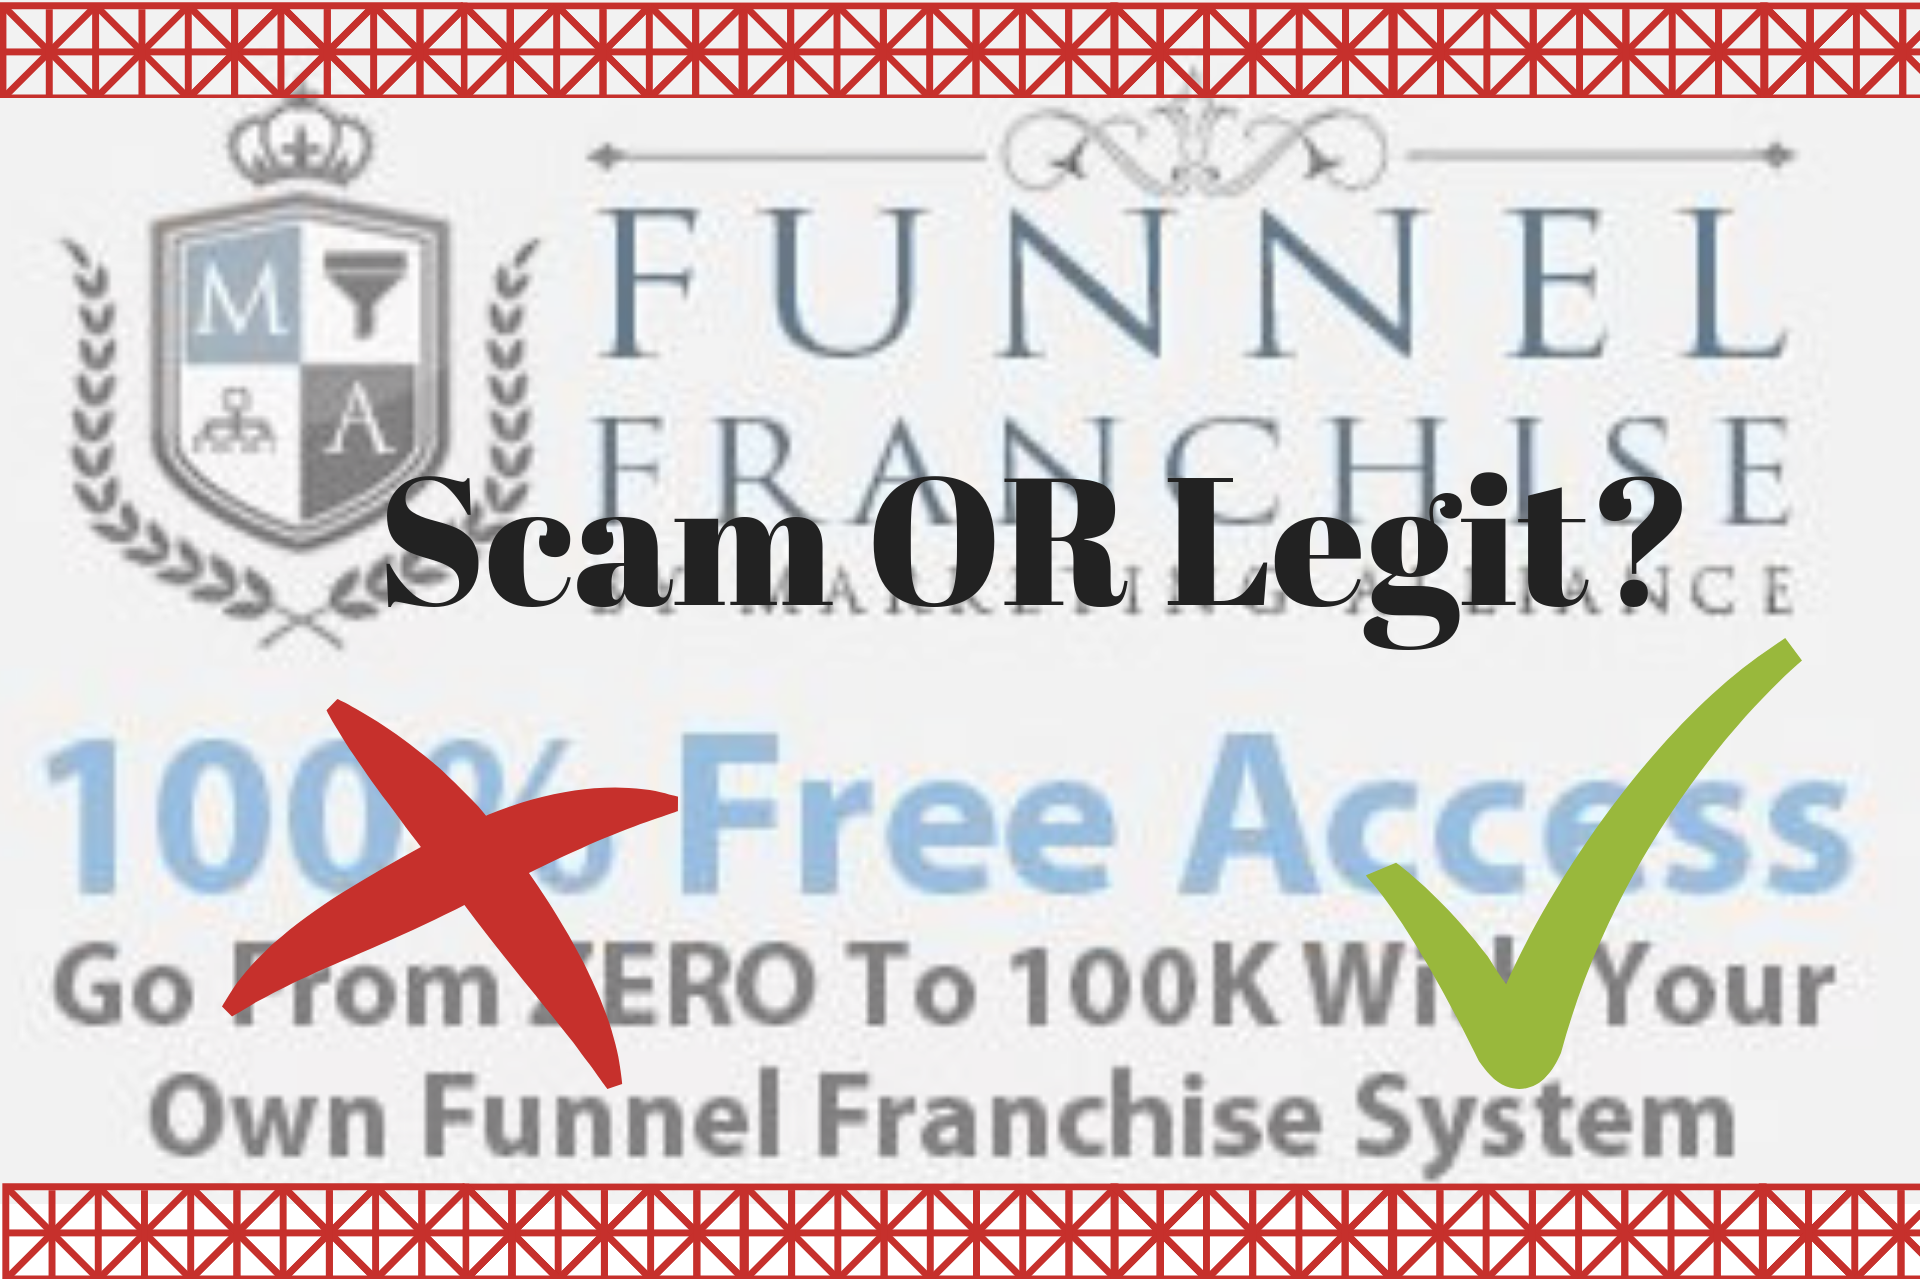 You are currently viewing Funnel Franchise System Scam or Legit?